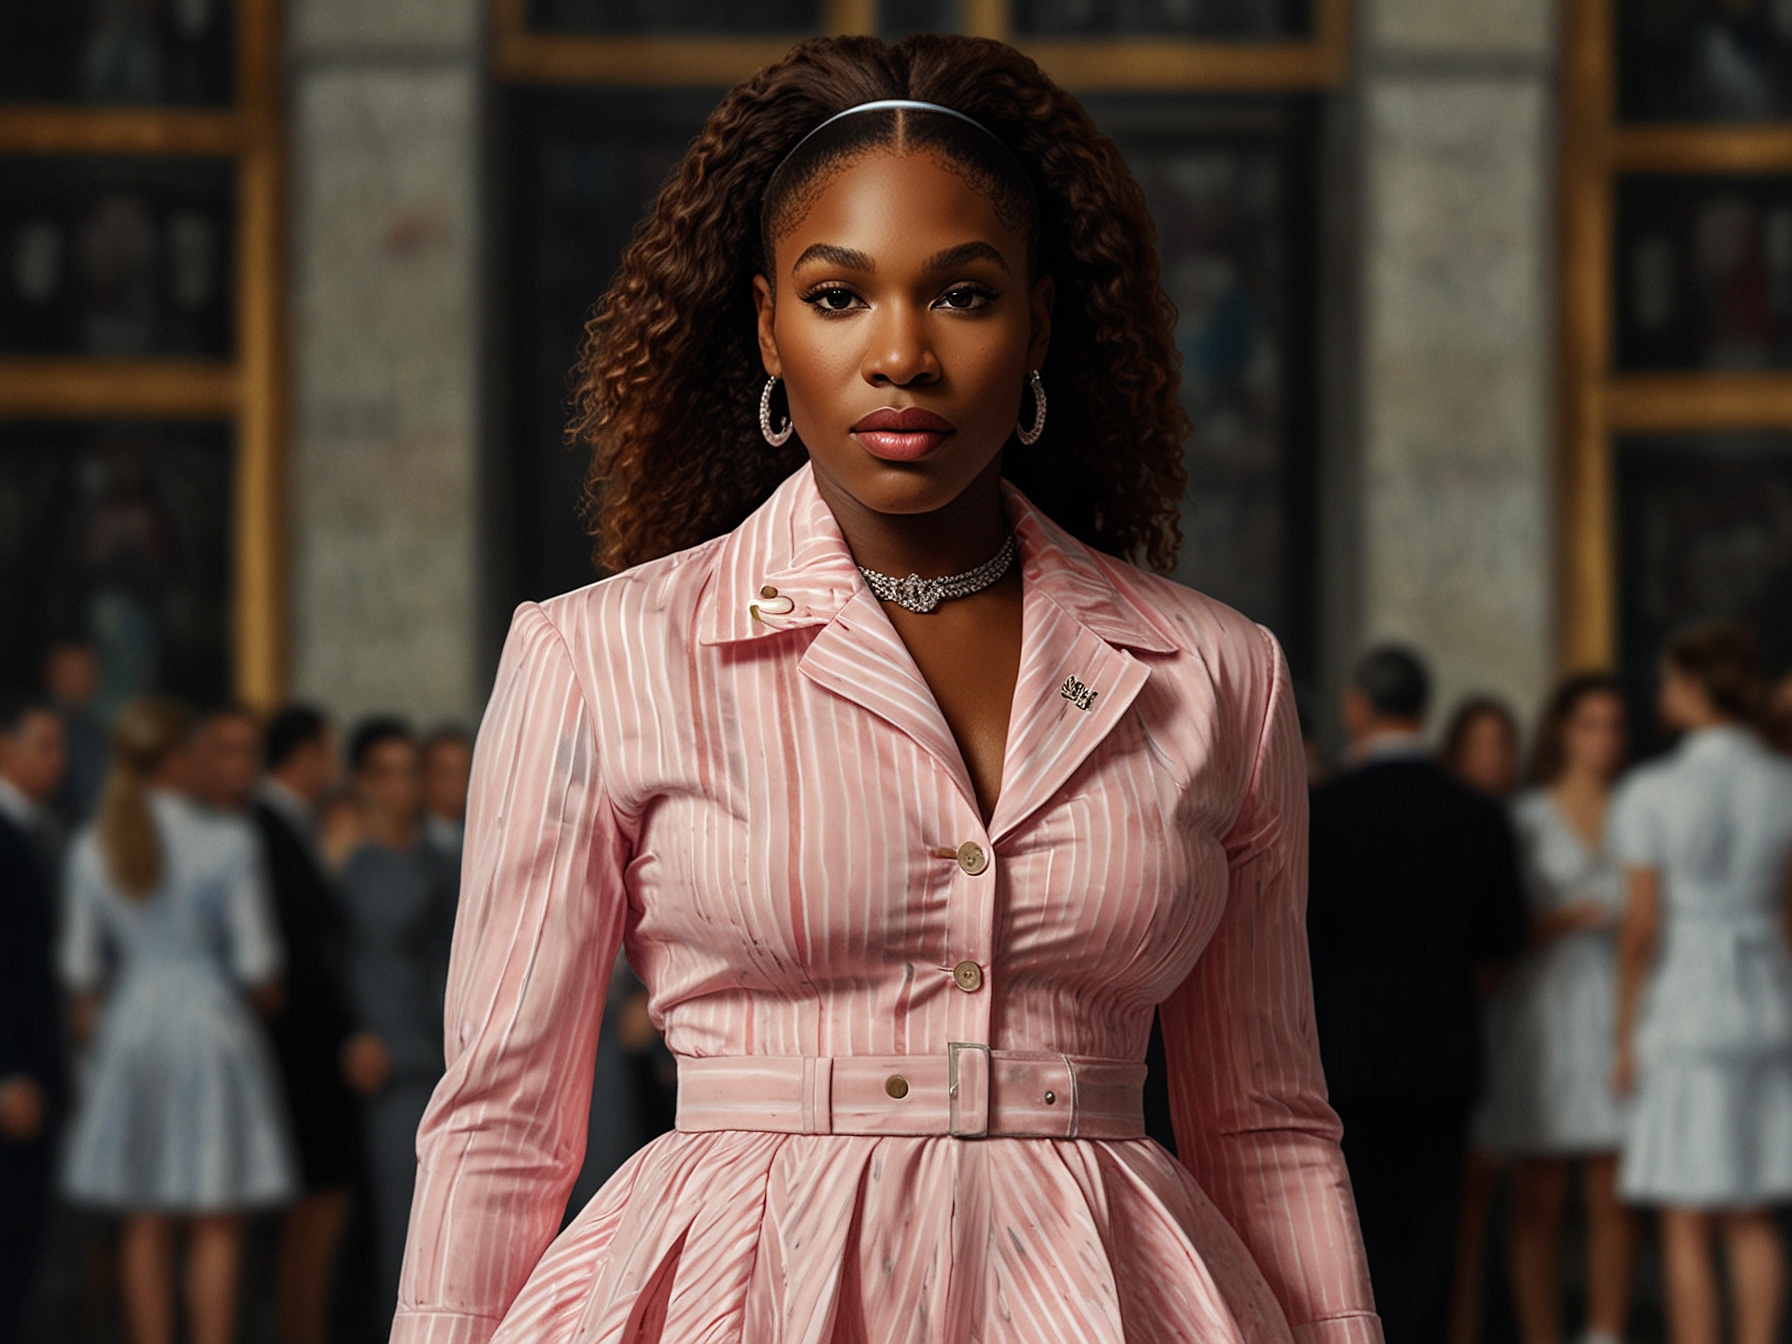 Serena Williams confidently walks into the Thom Browne fashion show, sporting a pastel pink striped dress shirt and a vibrant red skirt featuring the signature Hector motif.